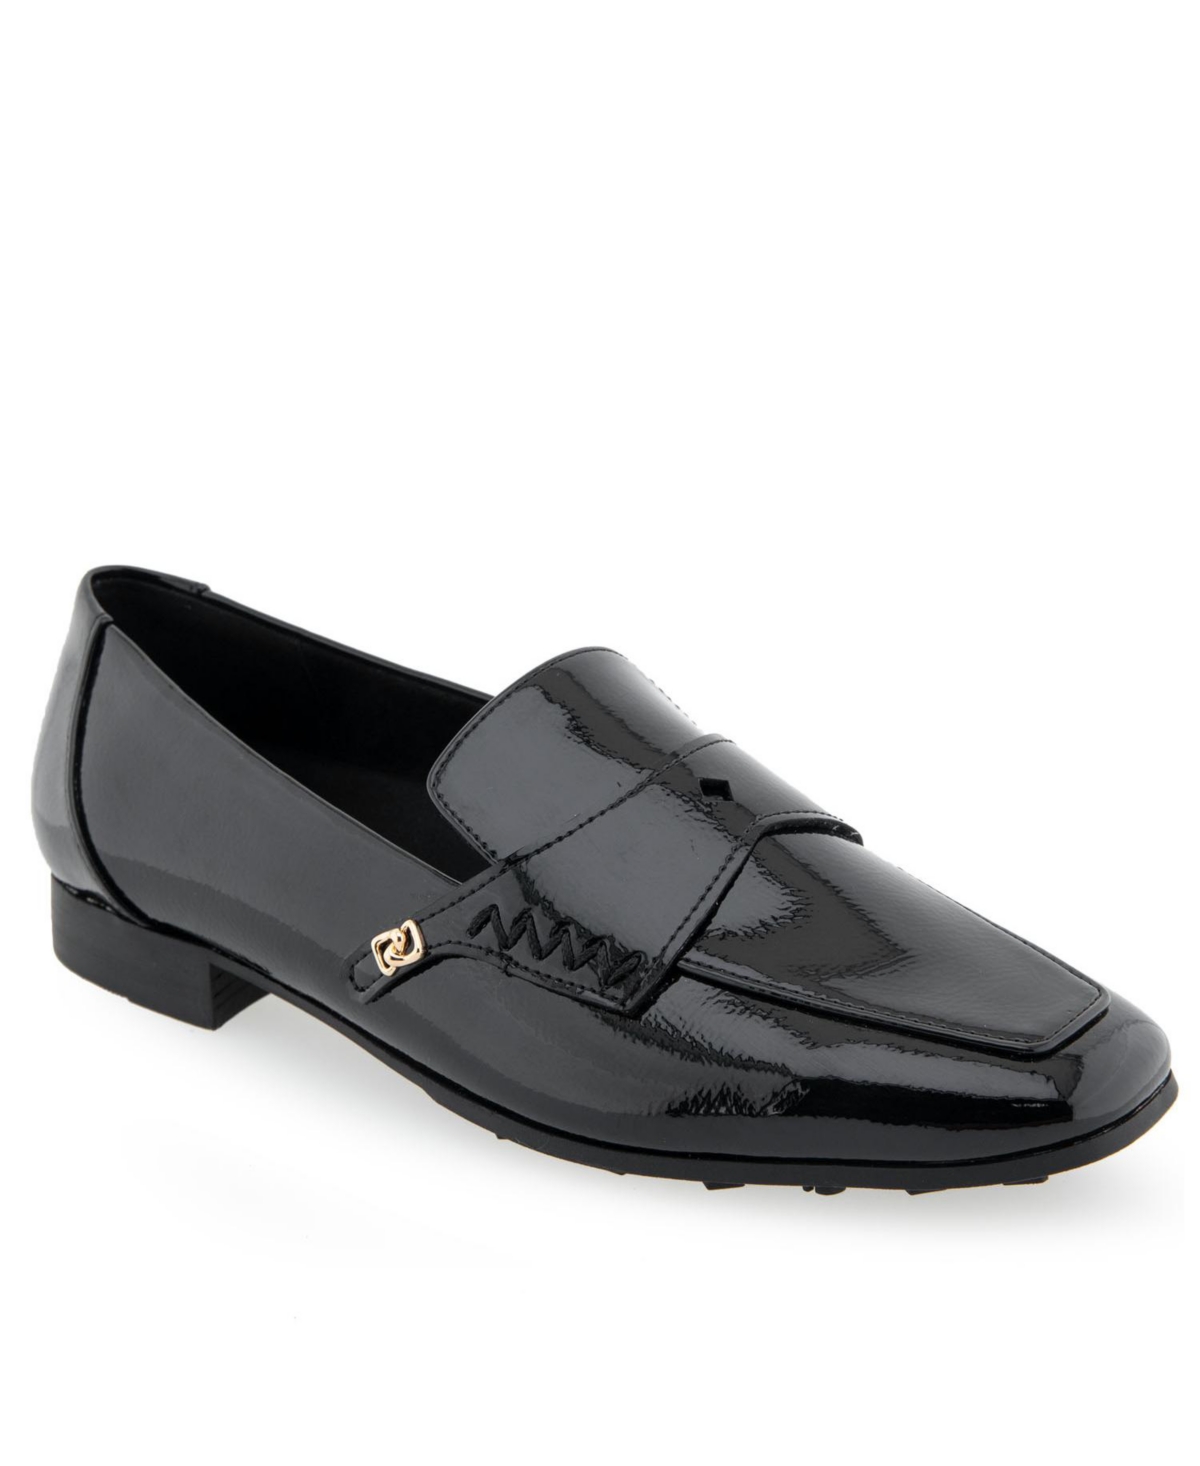 Praia Tailored-Loafer - Quiet Shade Patent Polyurethane -Faux Le